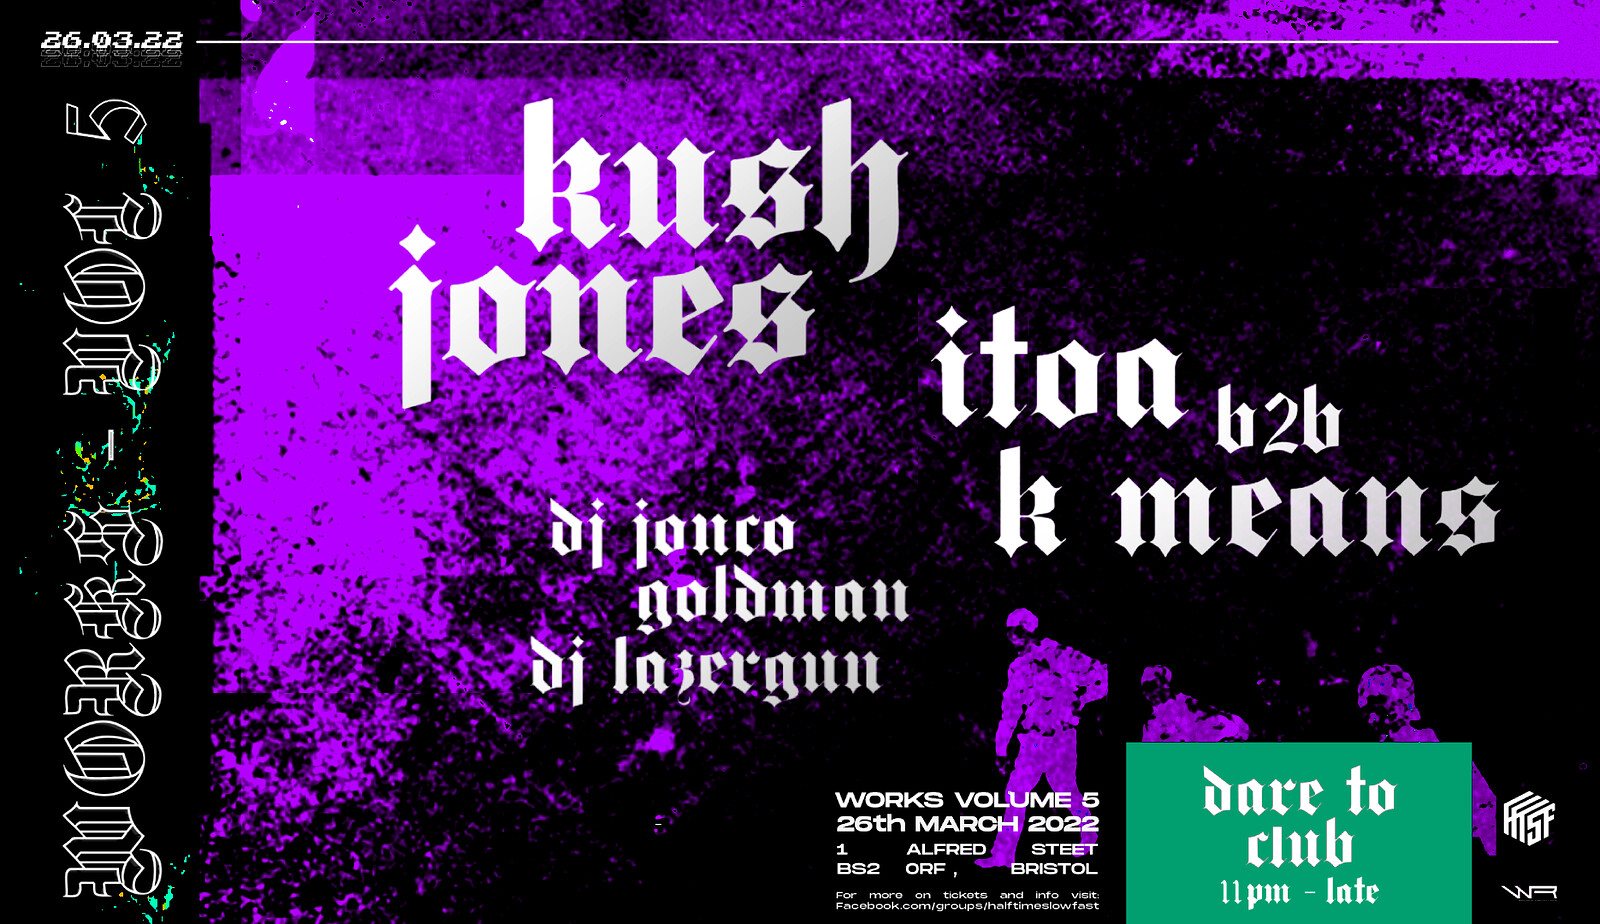 WORKS VOL 5: Kush Jones, Itoa b2b K Means +support at Dare to Club